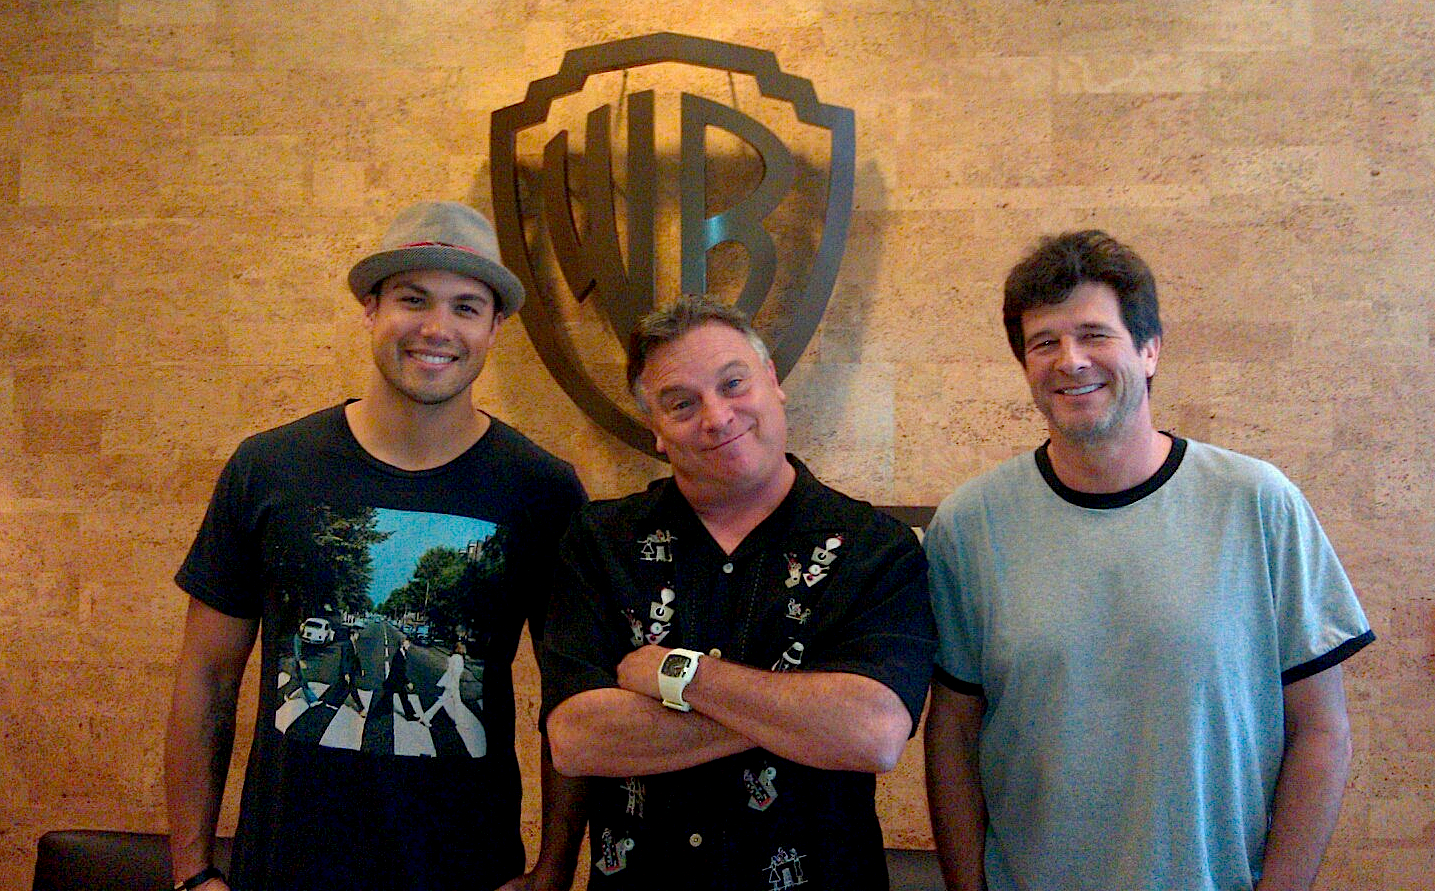 Finishing post-production at Warner Bros. Digital Imaging on the movie 